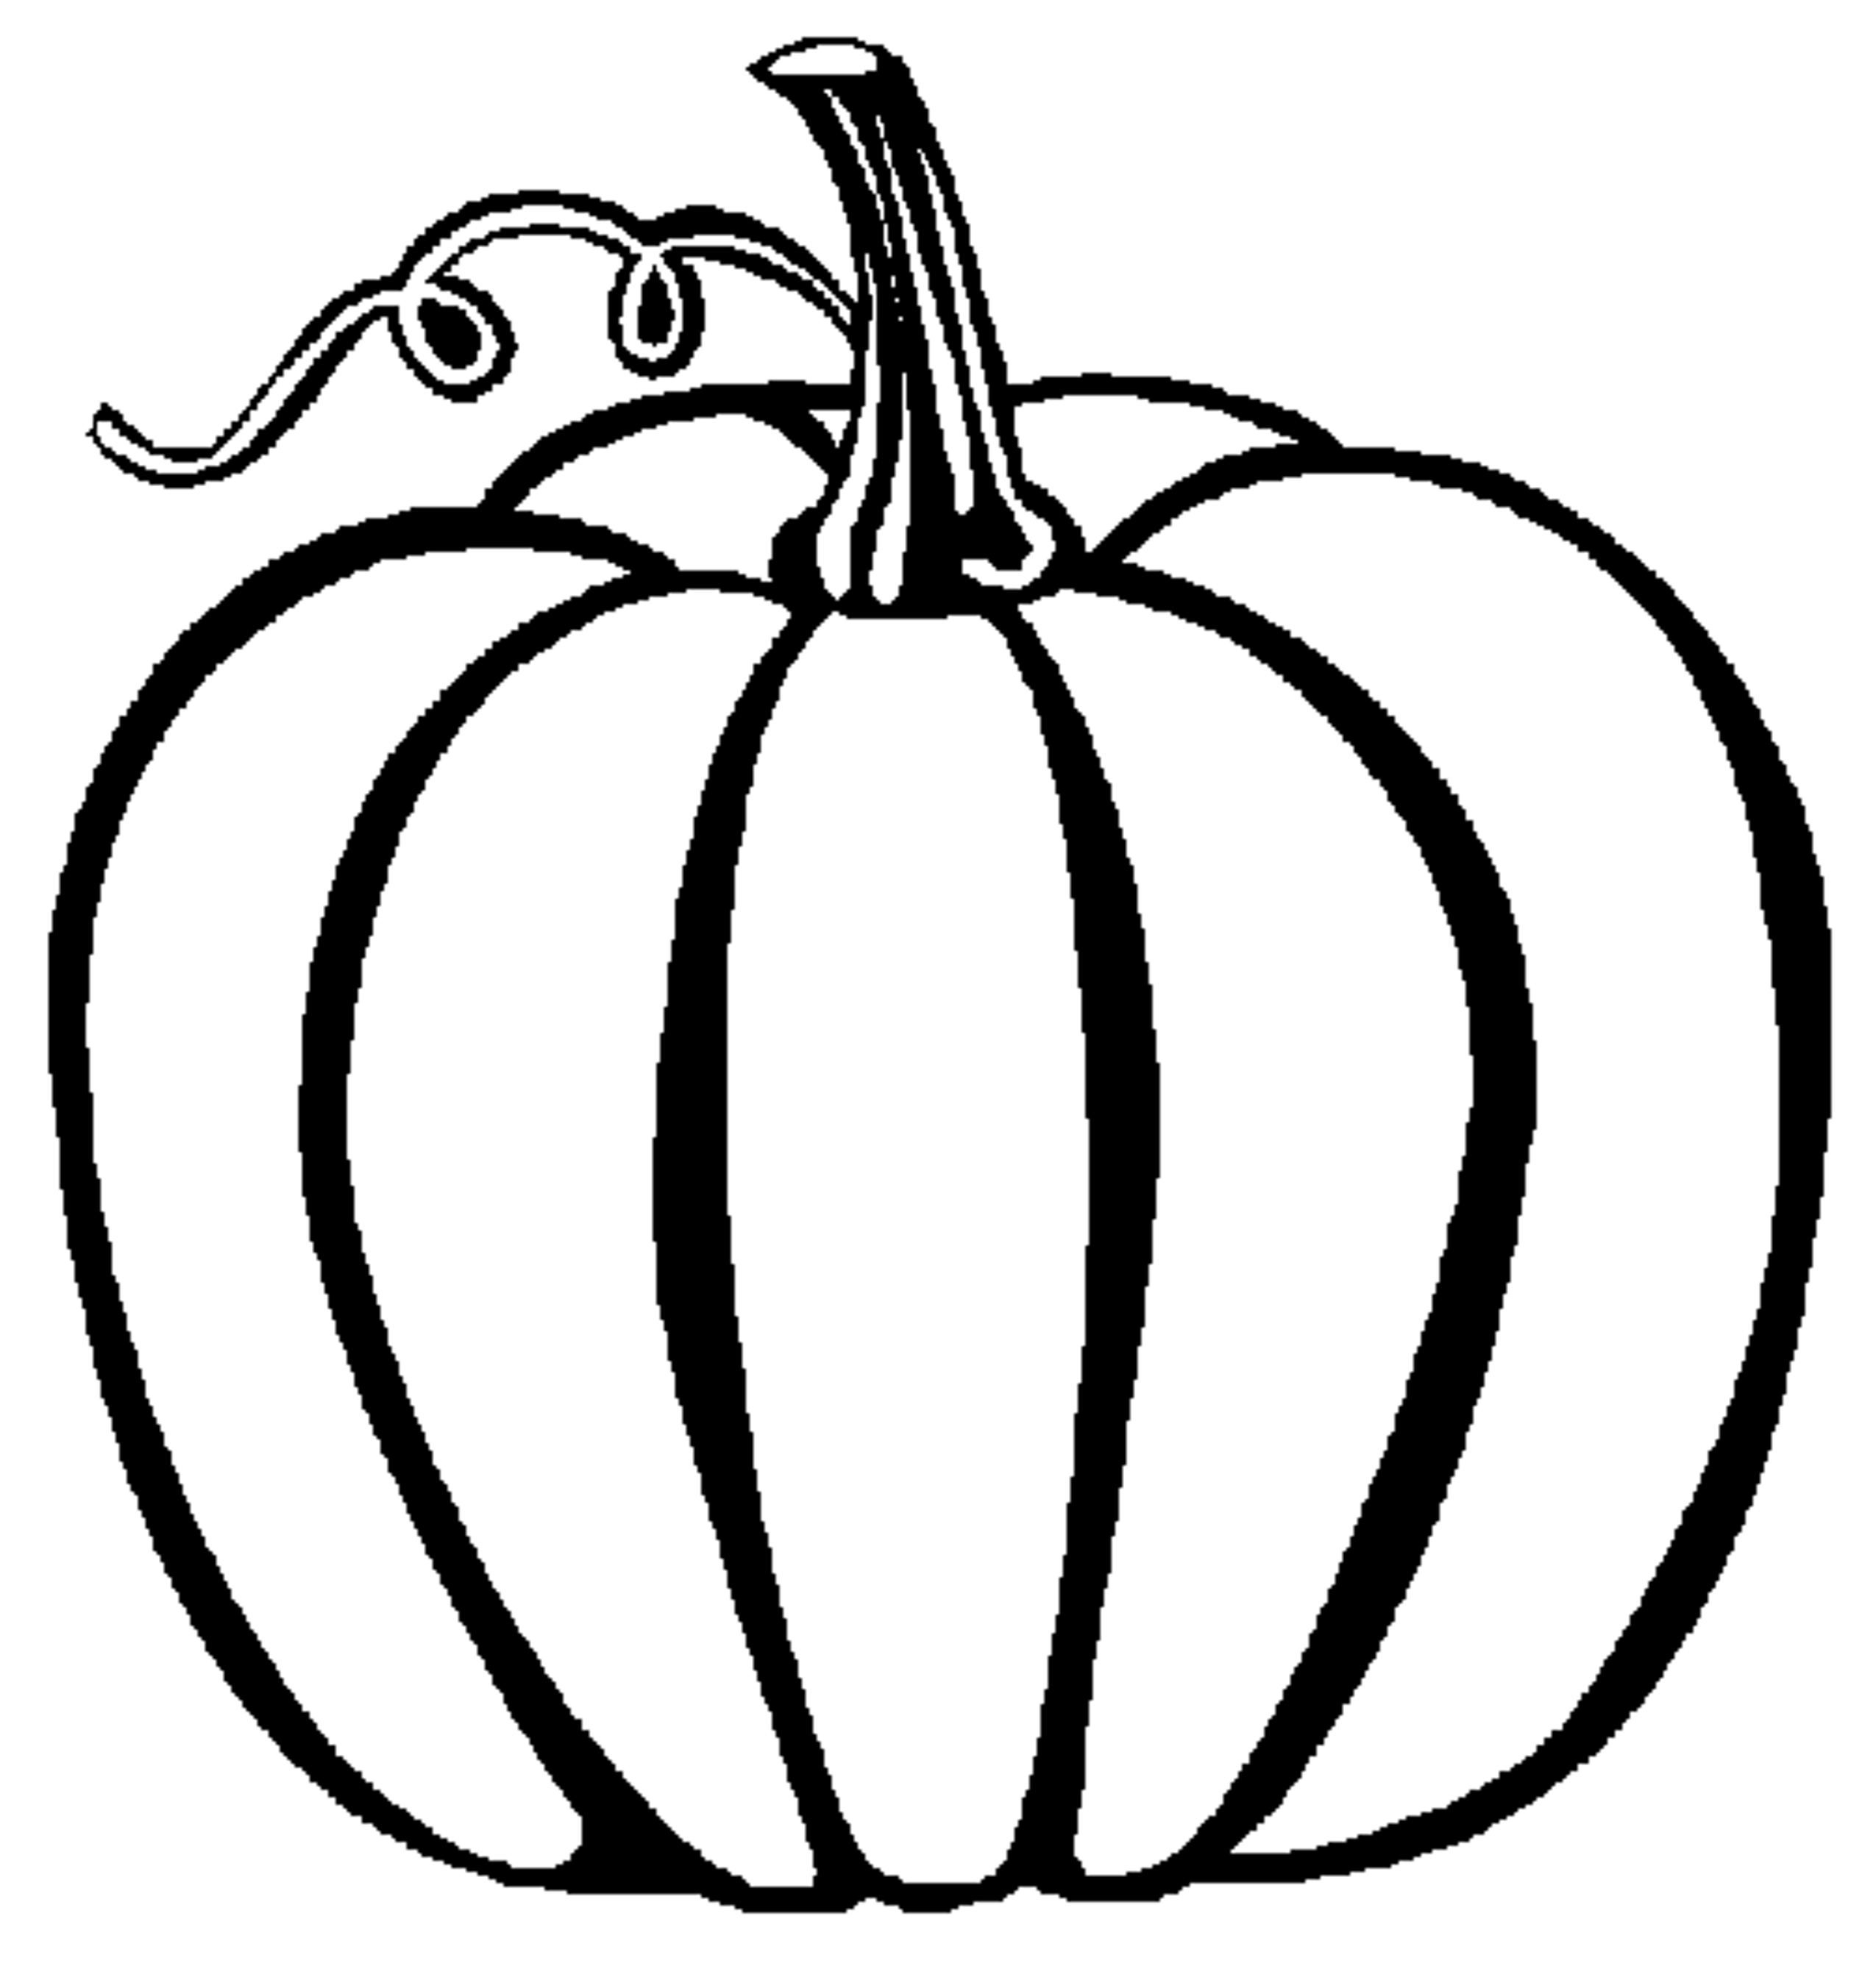 Coloring Page Of Pumpkin Amazing Of Stunning Pumpkin Patch Coloring Page Pumpkin W 544